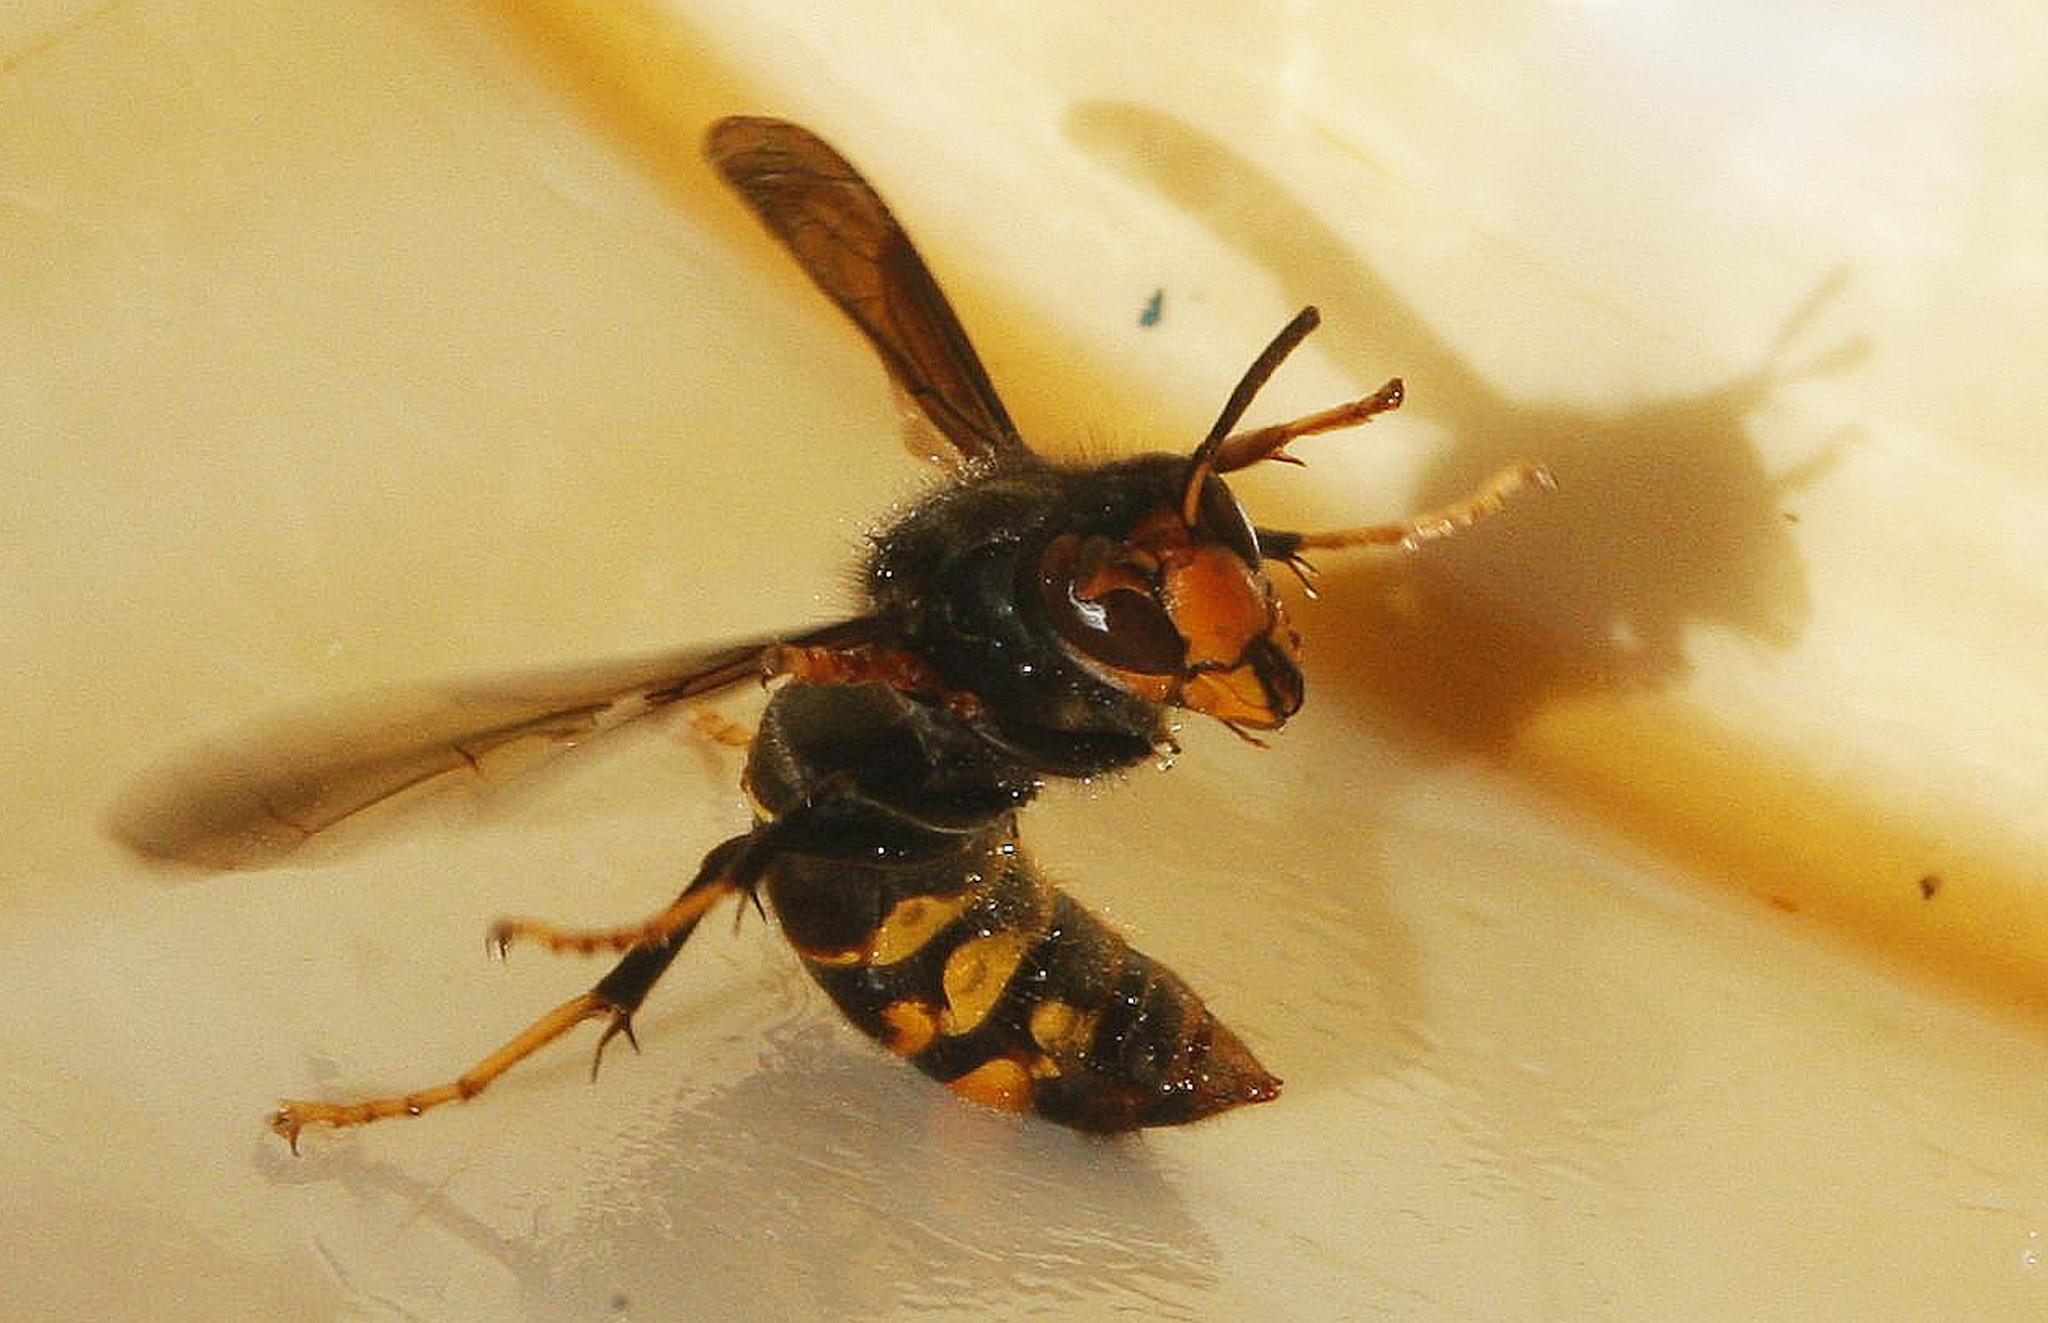 An Asian hornet, Latin name "Vespa Velutina", is seen in a beehive in Fargues Saint Hilaire, south western France, December 1, 2009